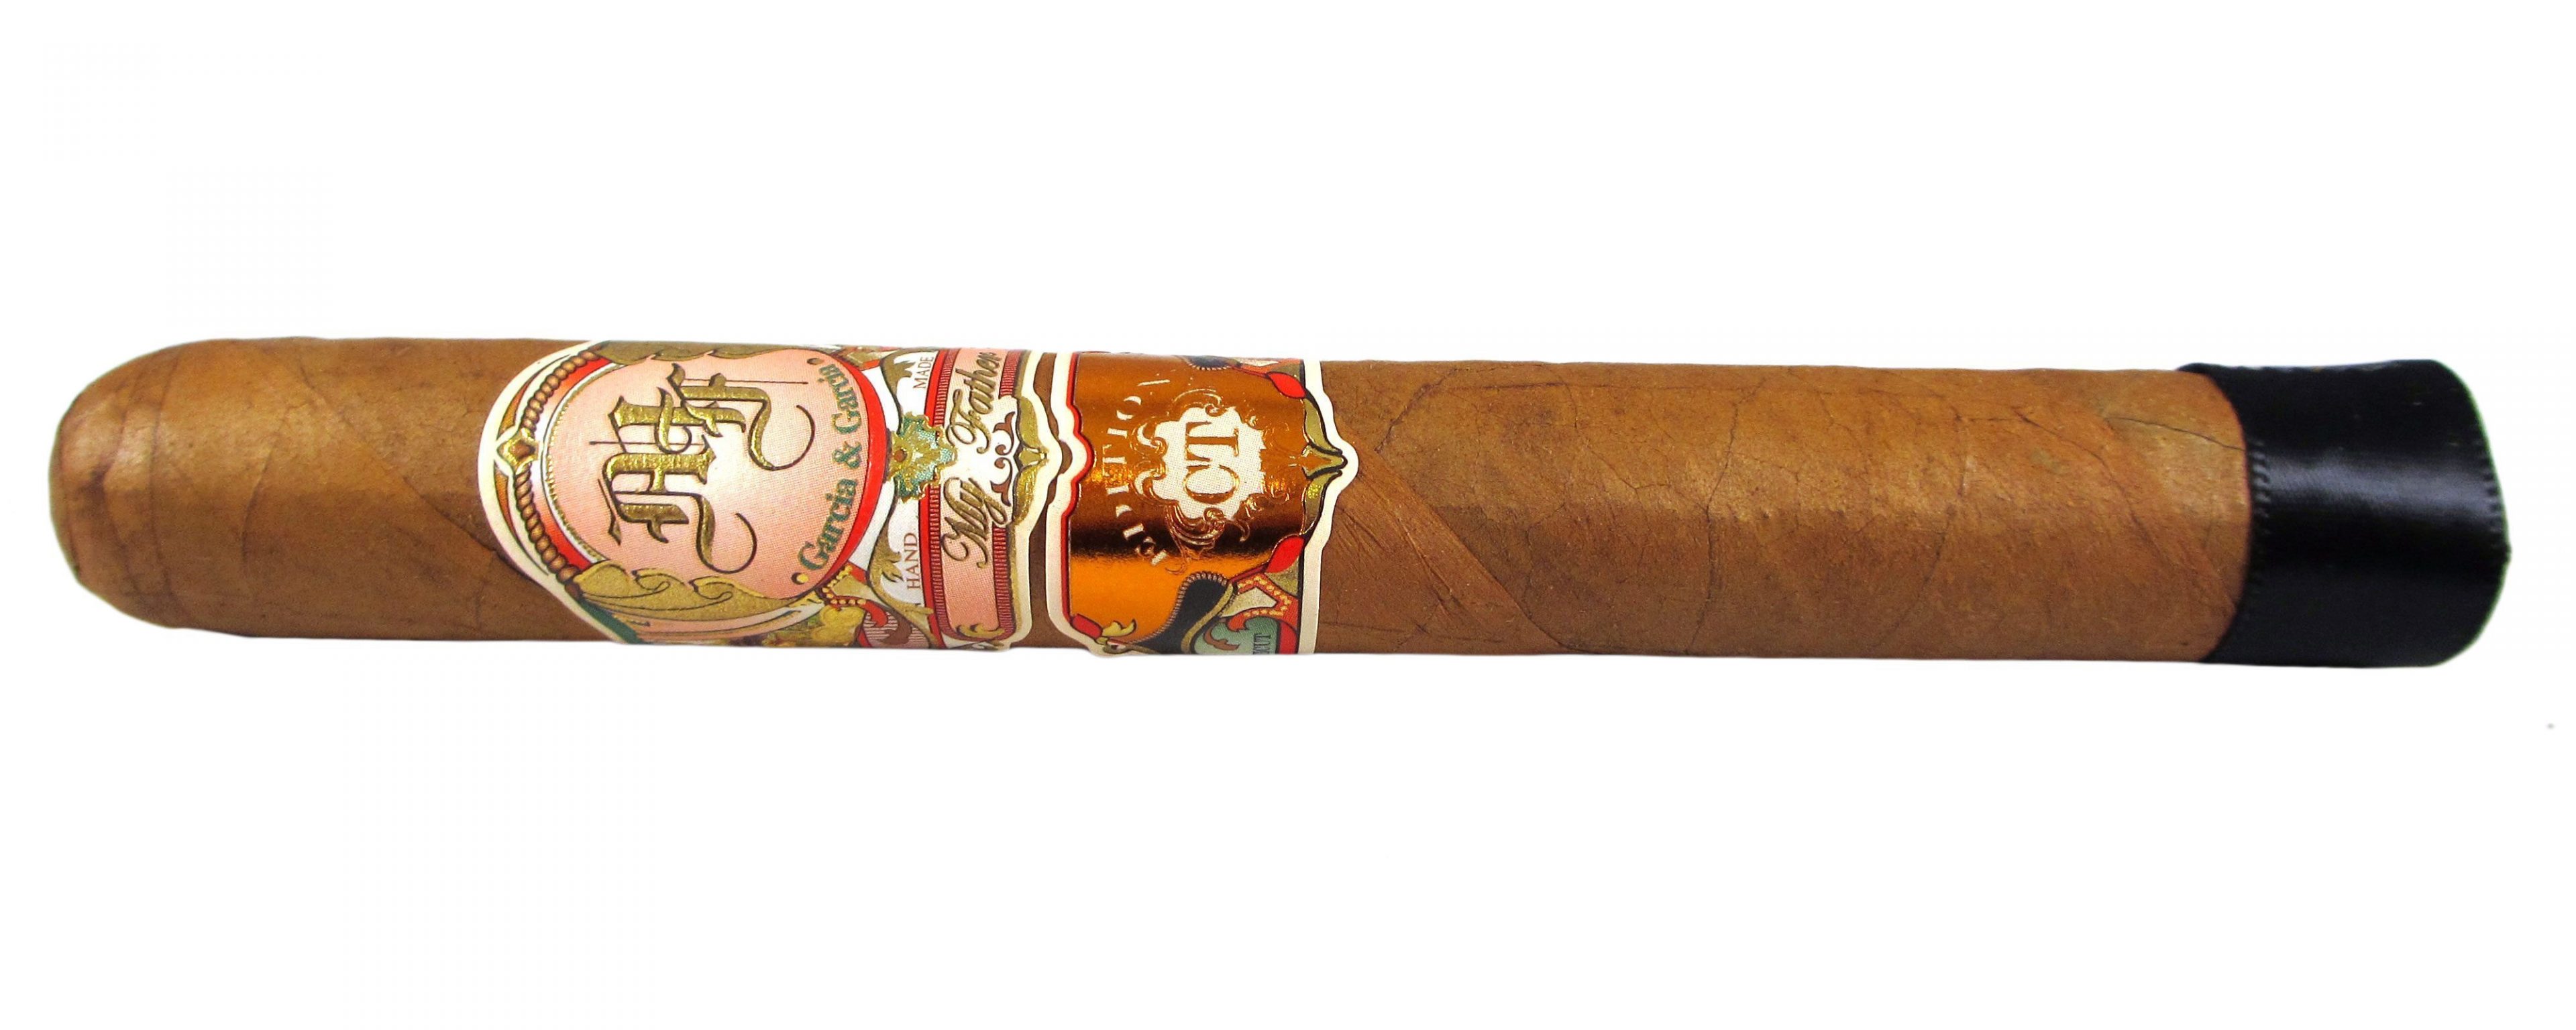 Blind Cigar Review: My Father | Connecticut Corona Gorda